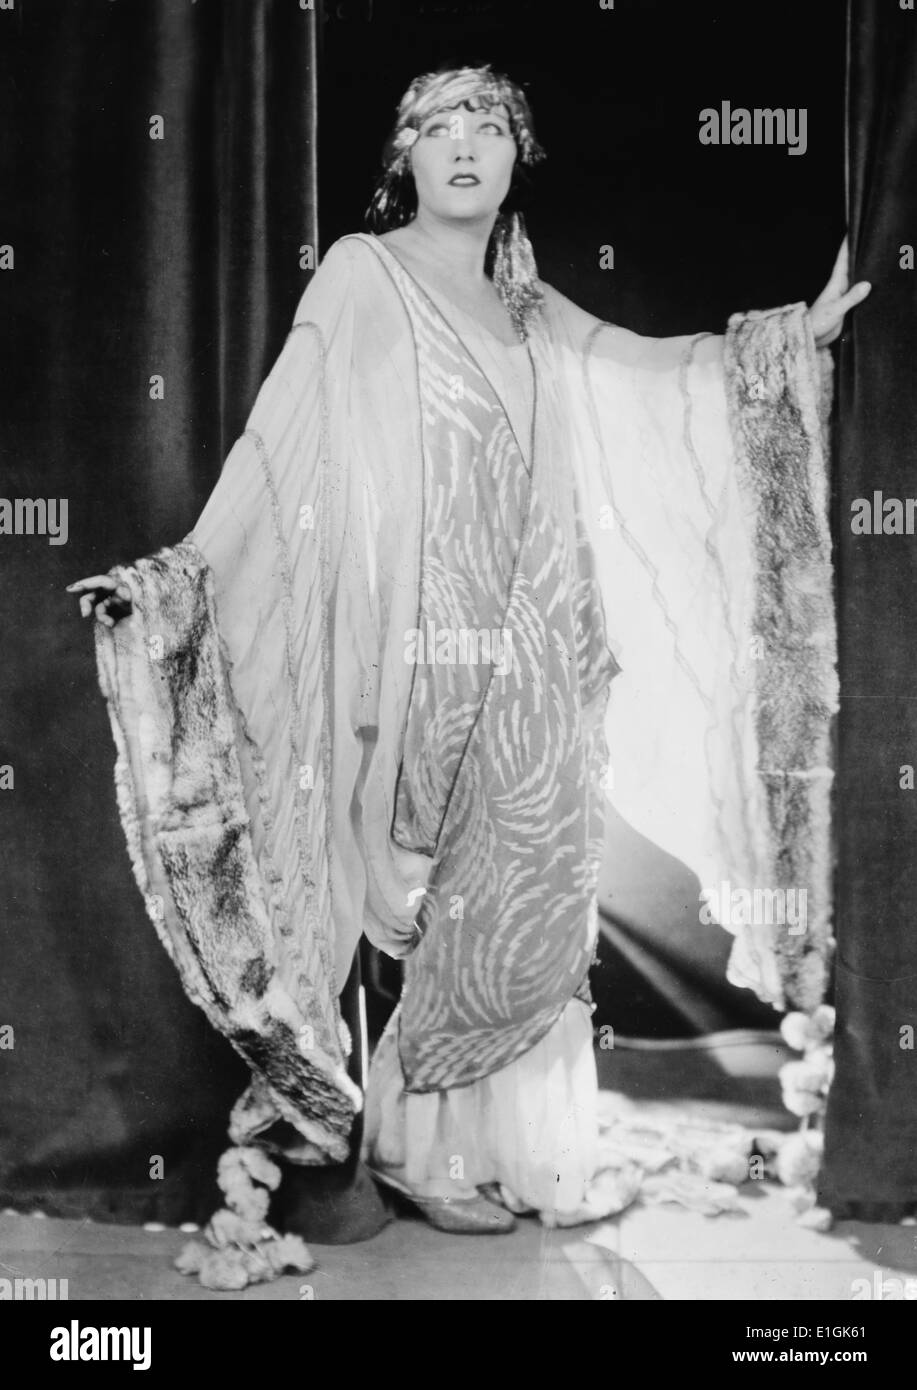 Gloria May Josephine Swanson 1899 – 1983) American actress, singer and producer, who is best known for her role as Norma Desmond, a faded silent film star, in the critically acclaimed film Sunset Boulevard (1950). She was one of the most prominent stars during the silent film era as both an actress and a fashion icon Stock Photo